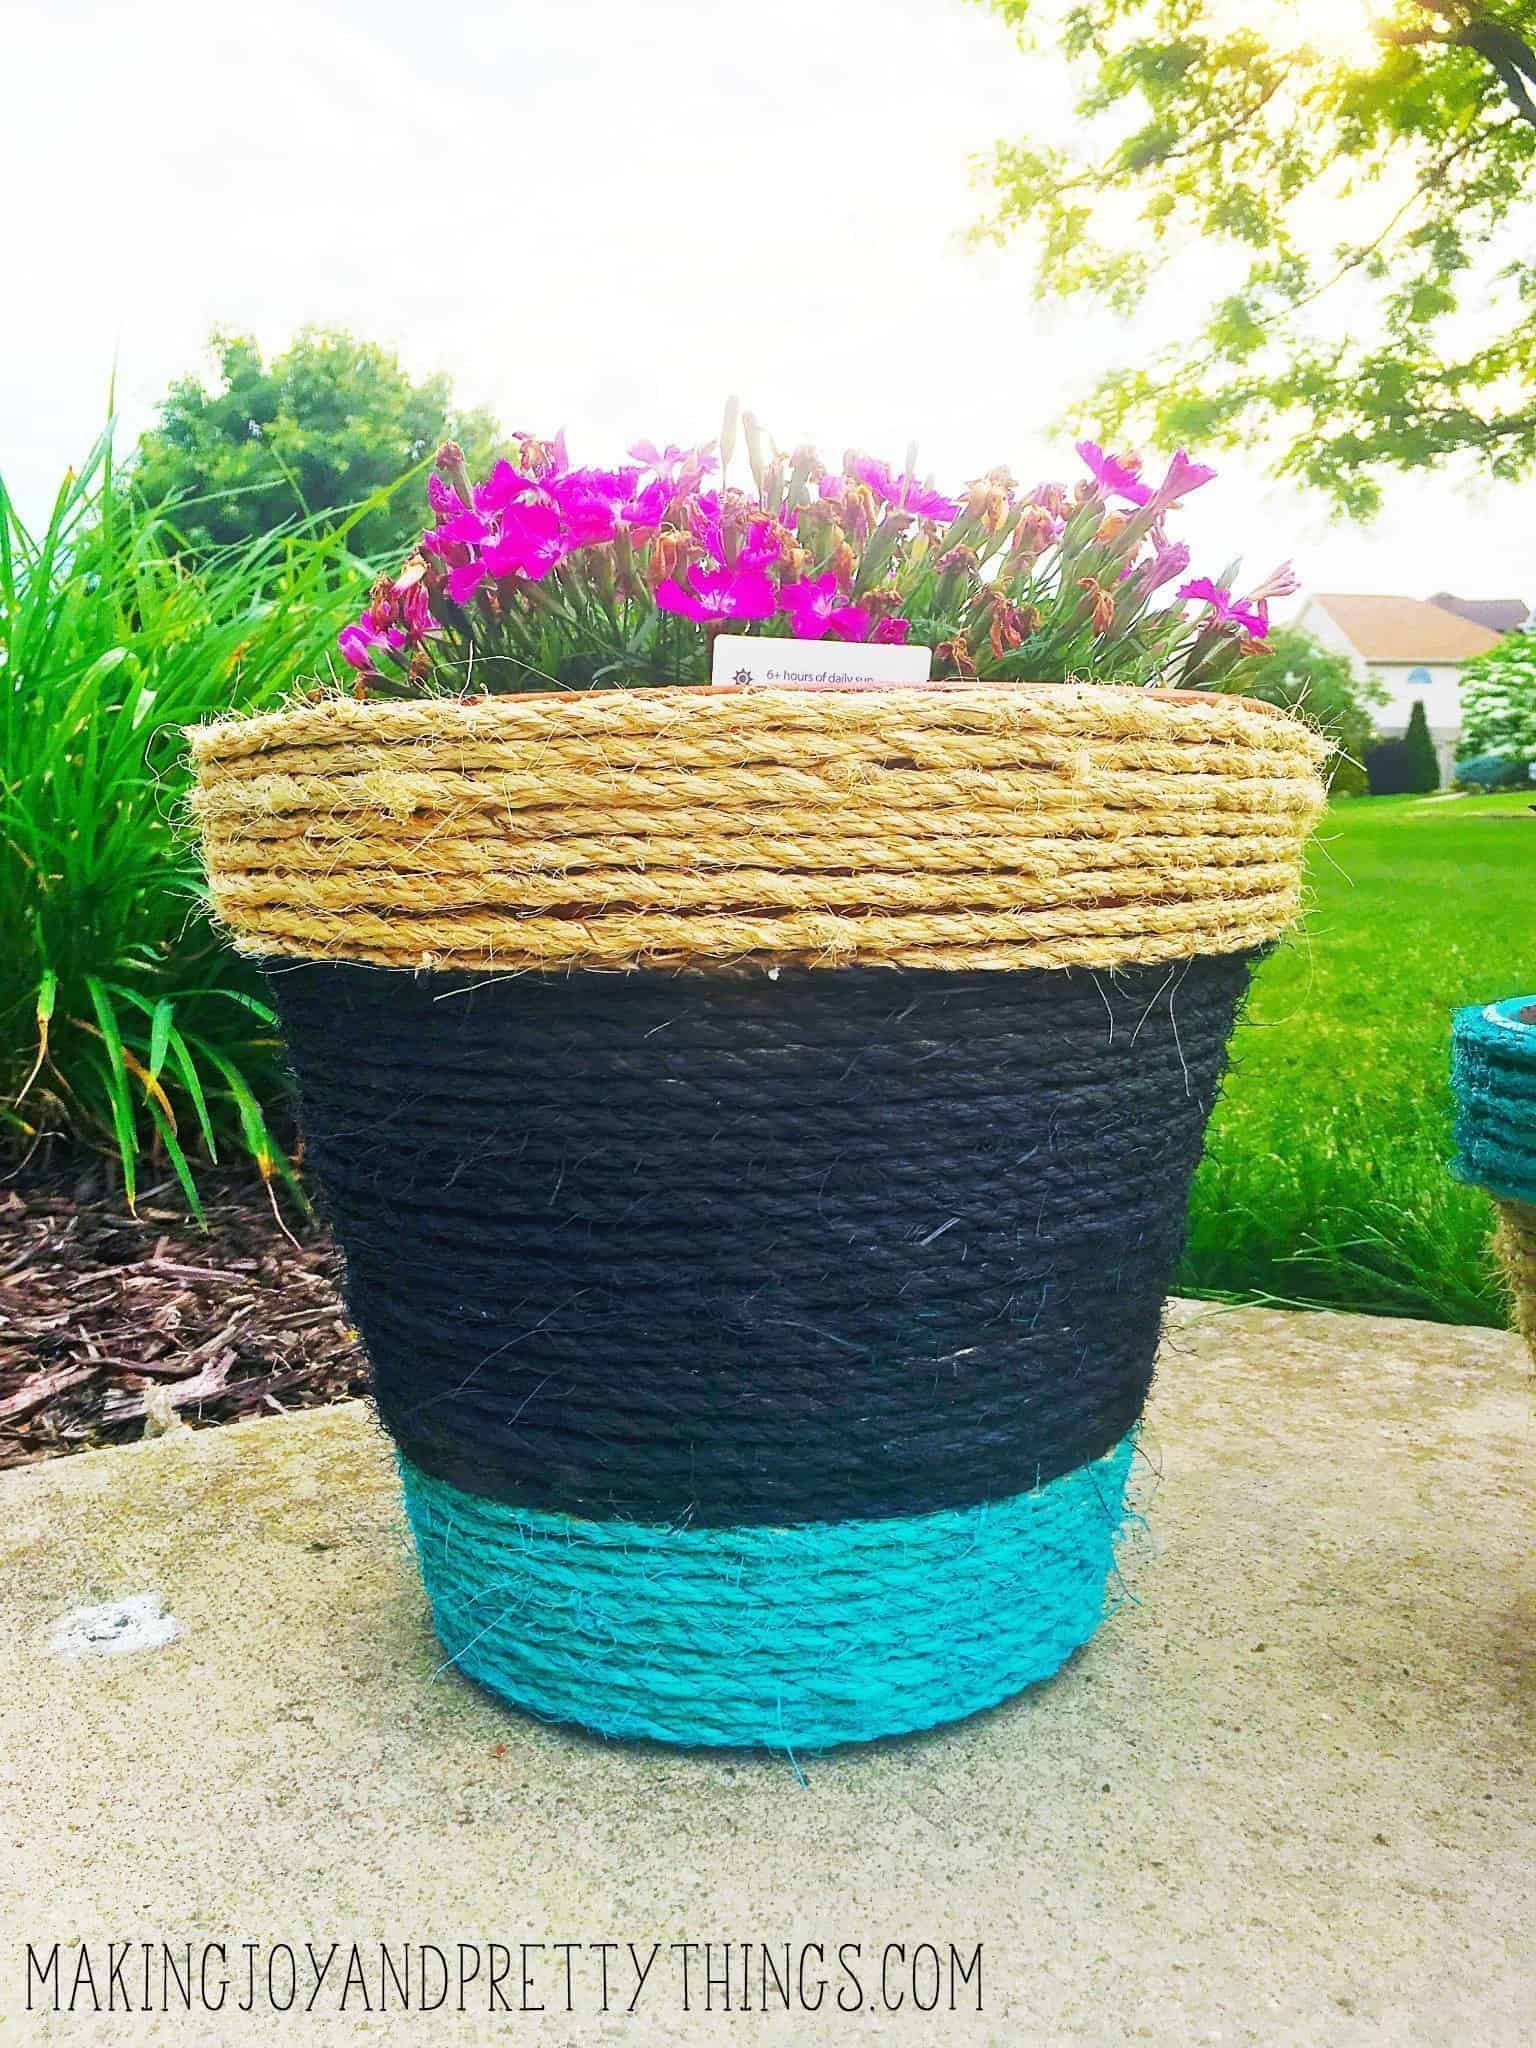 The options are endless with these rope planters. You can choose any color of paint or leave bare its really up to you!